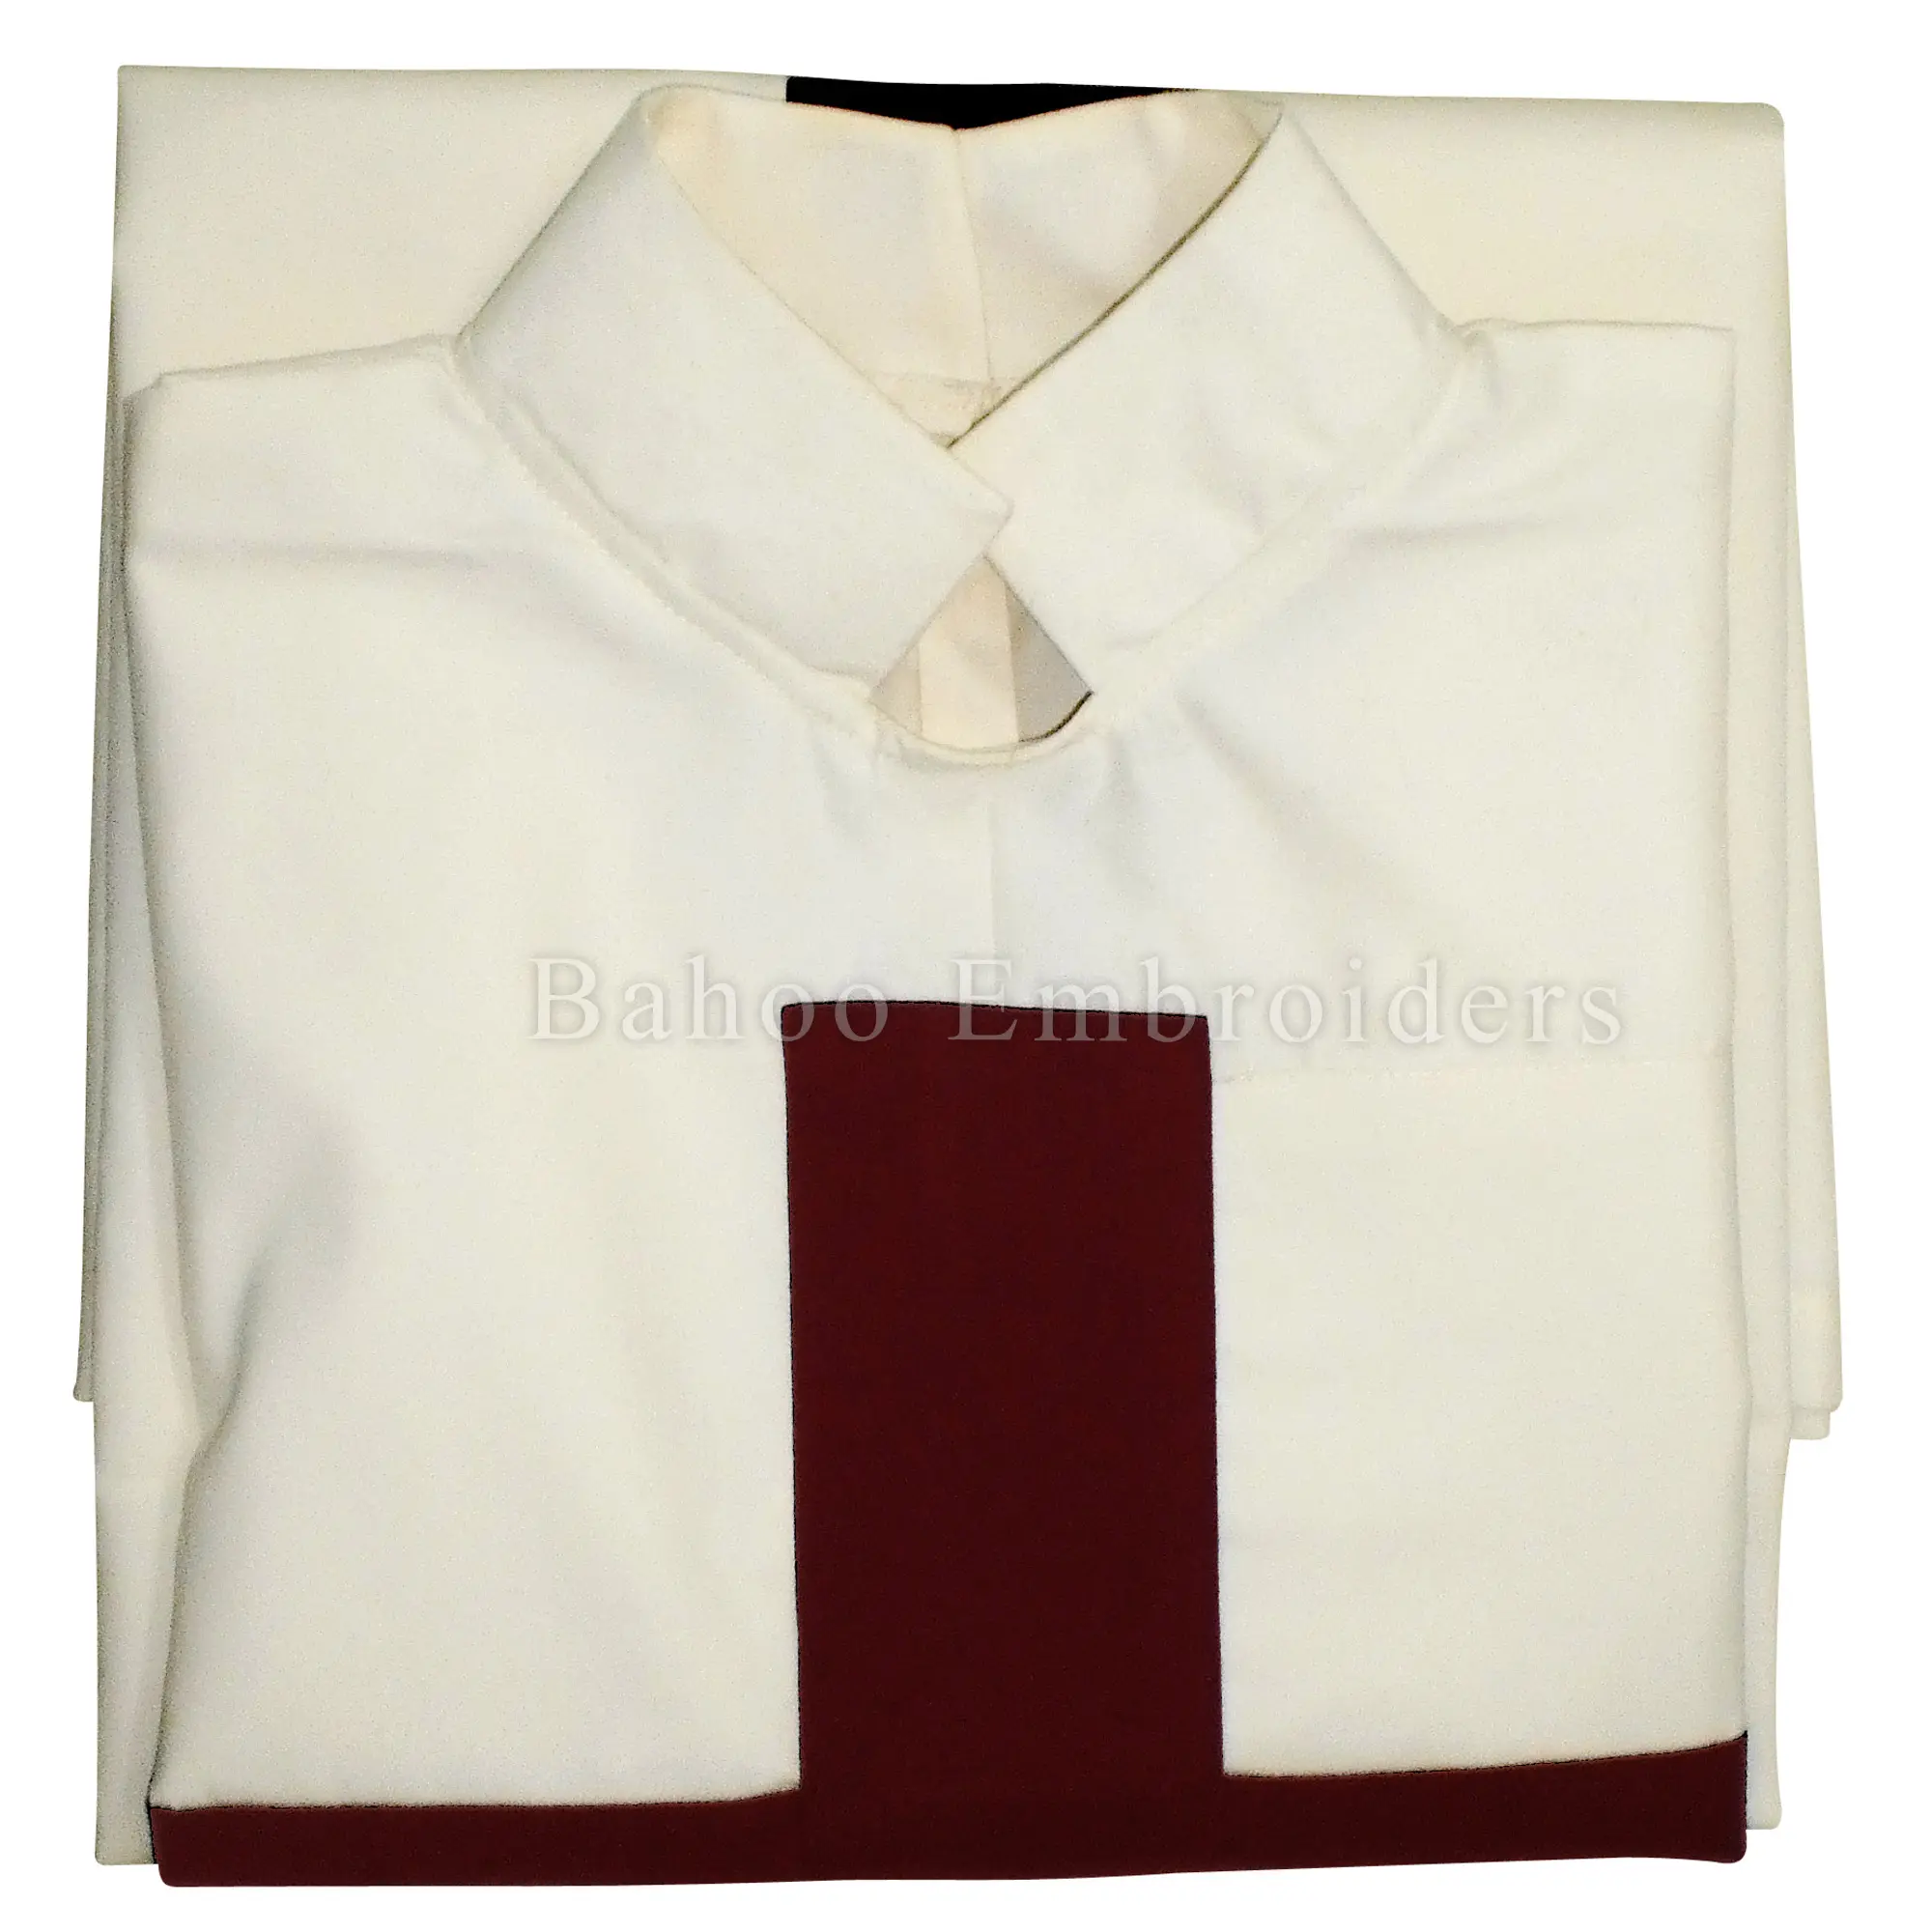 KNIGHTS TEMPLAR WITH OUR METICULOUSLY CRAFTED TEMPLAR HERITAGE TUNIC